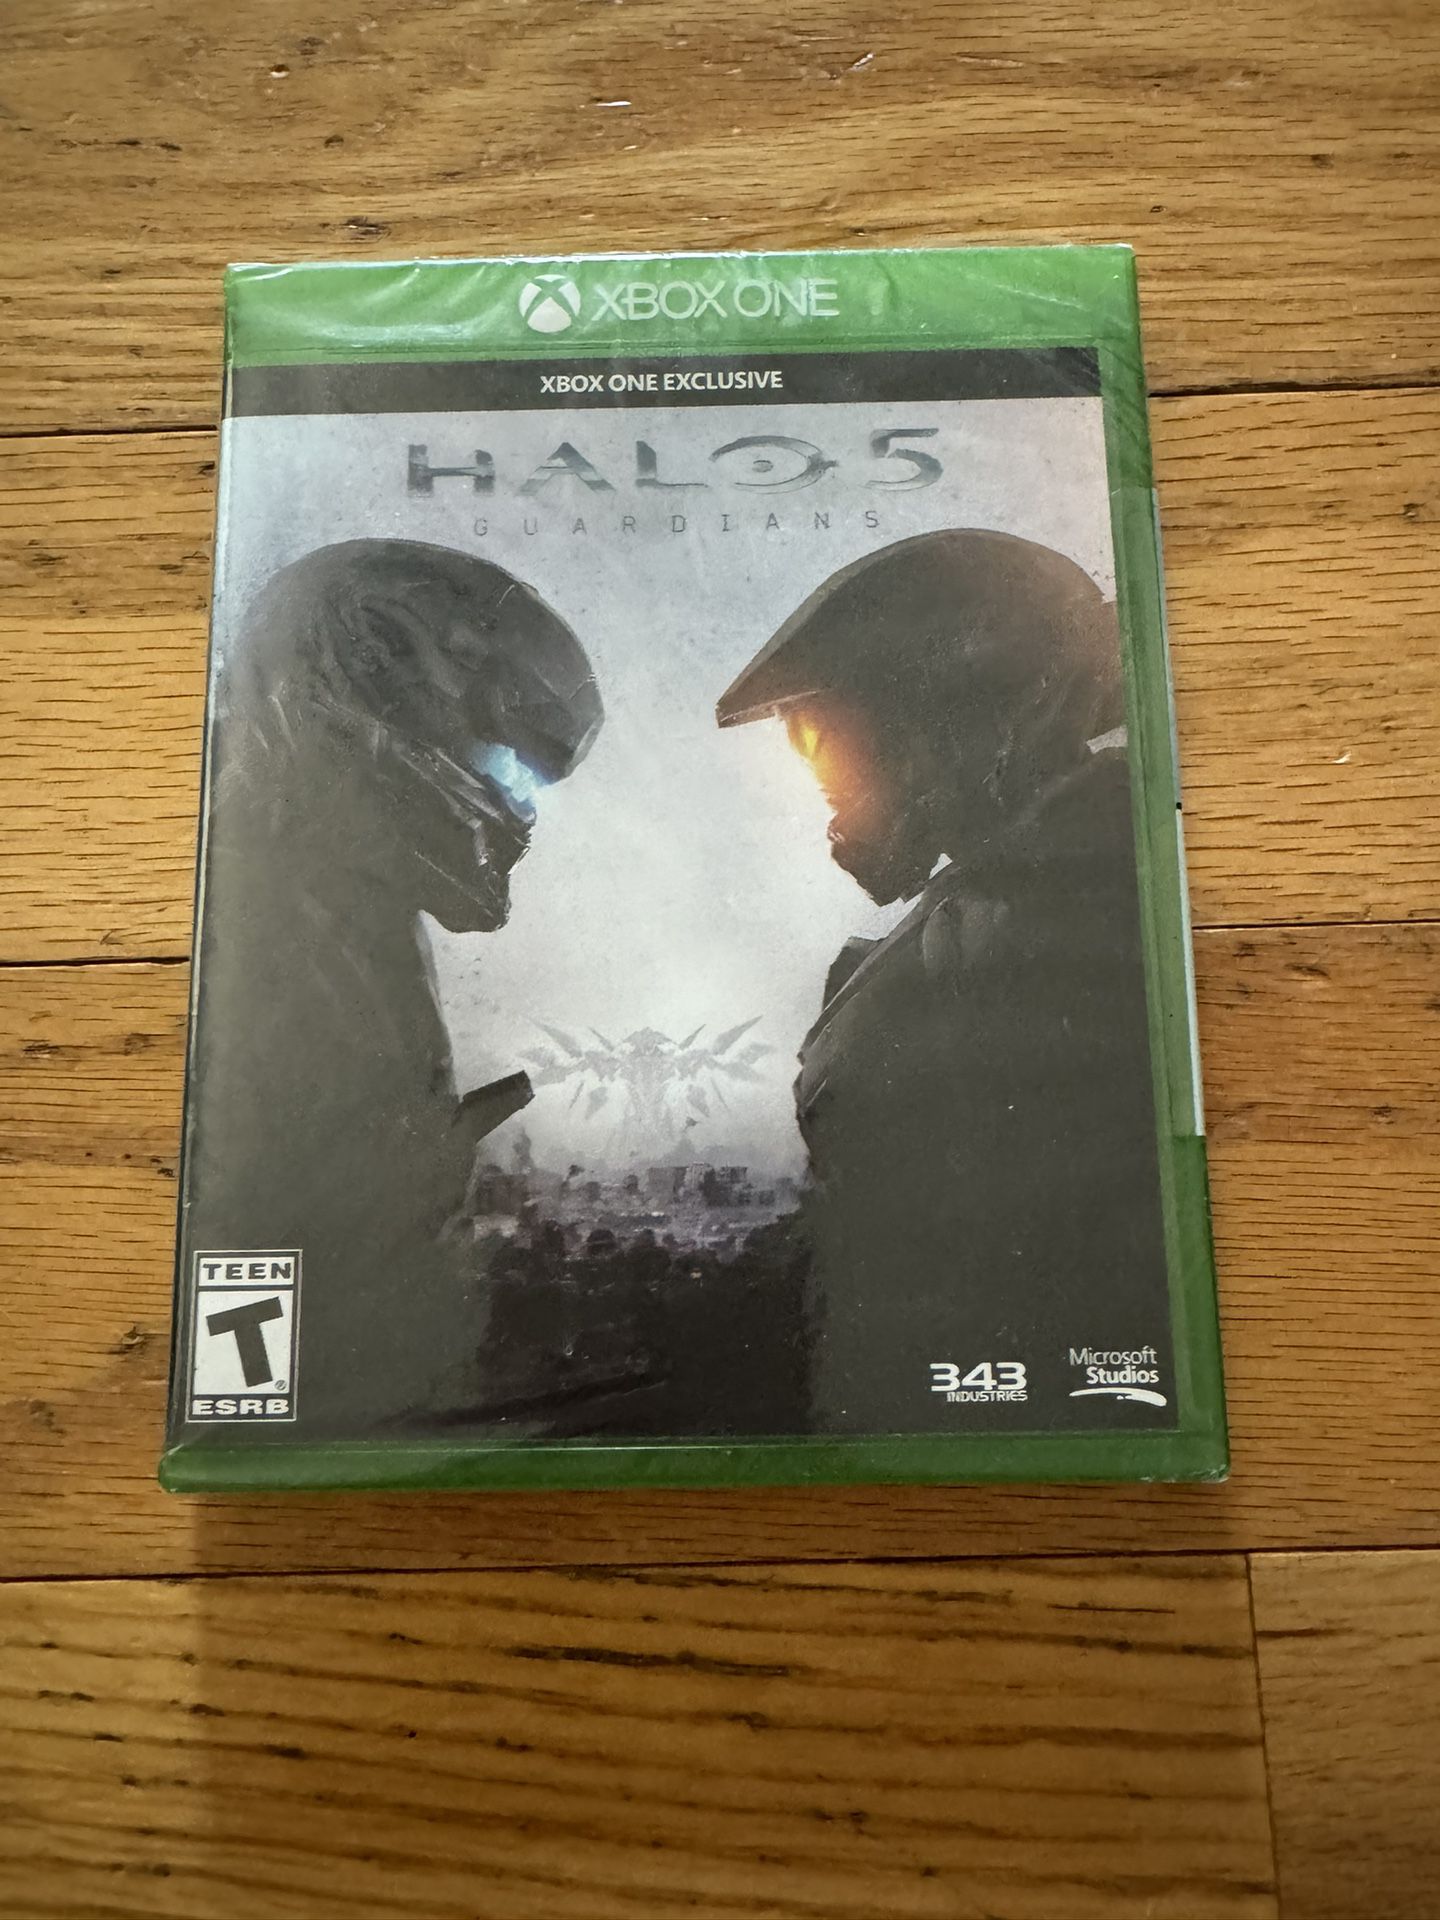 Halo 5: Guardians - Microsoft Xbox One Exclusive BRAND NEW Sealed Fast Shipping